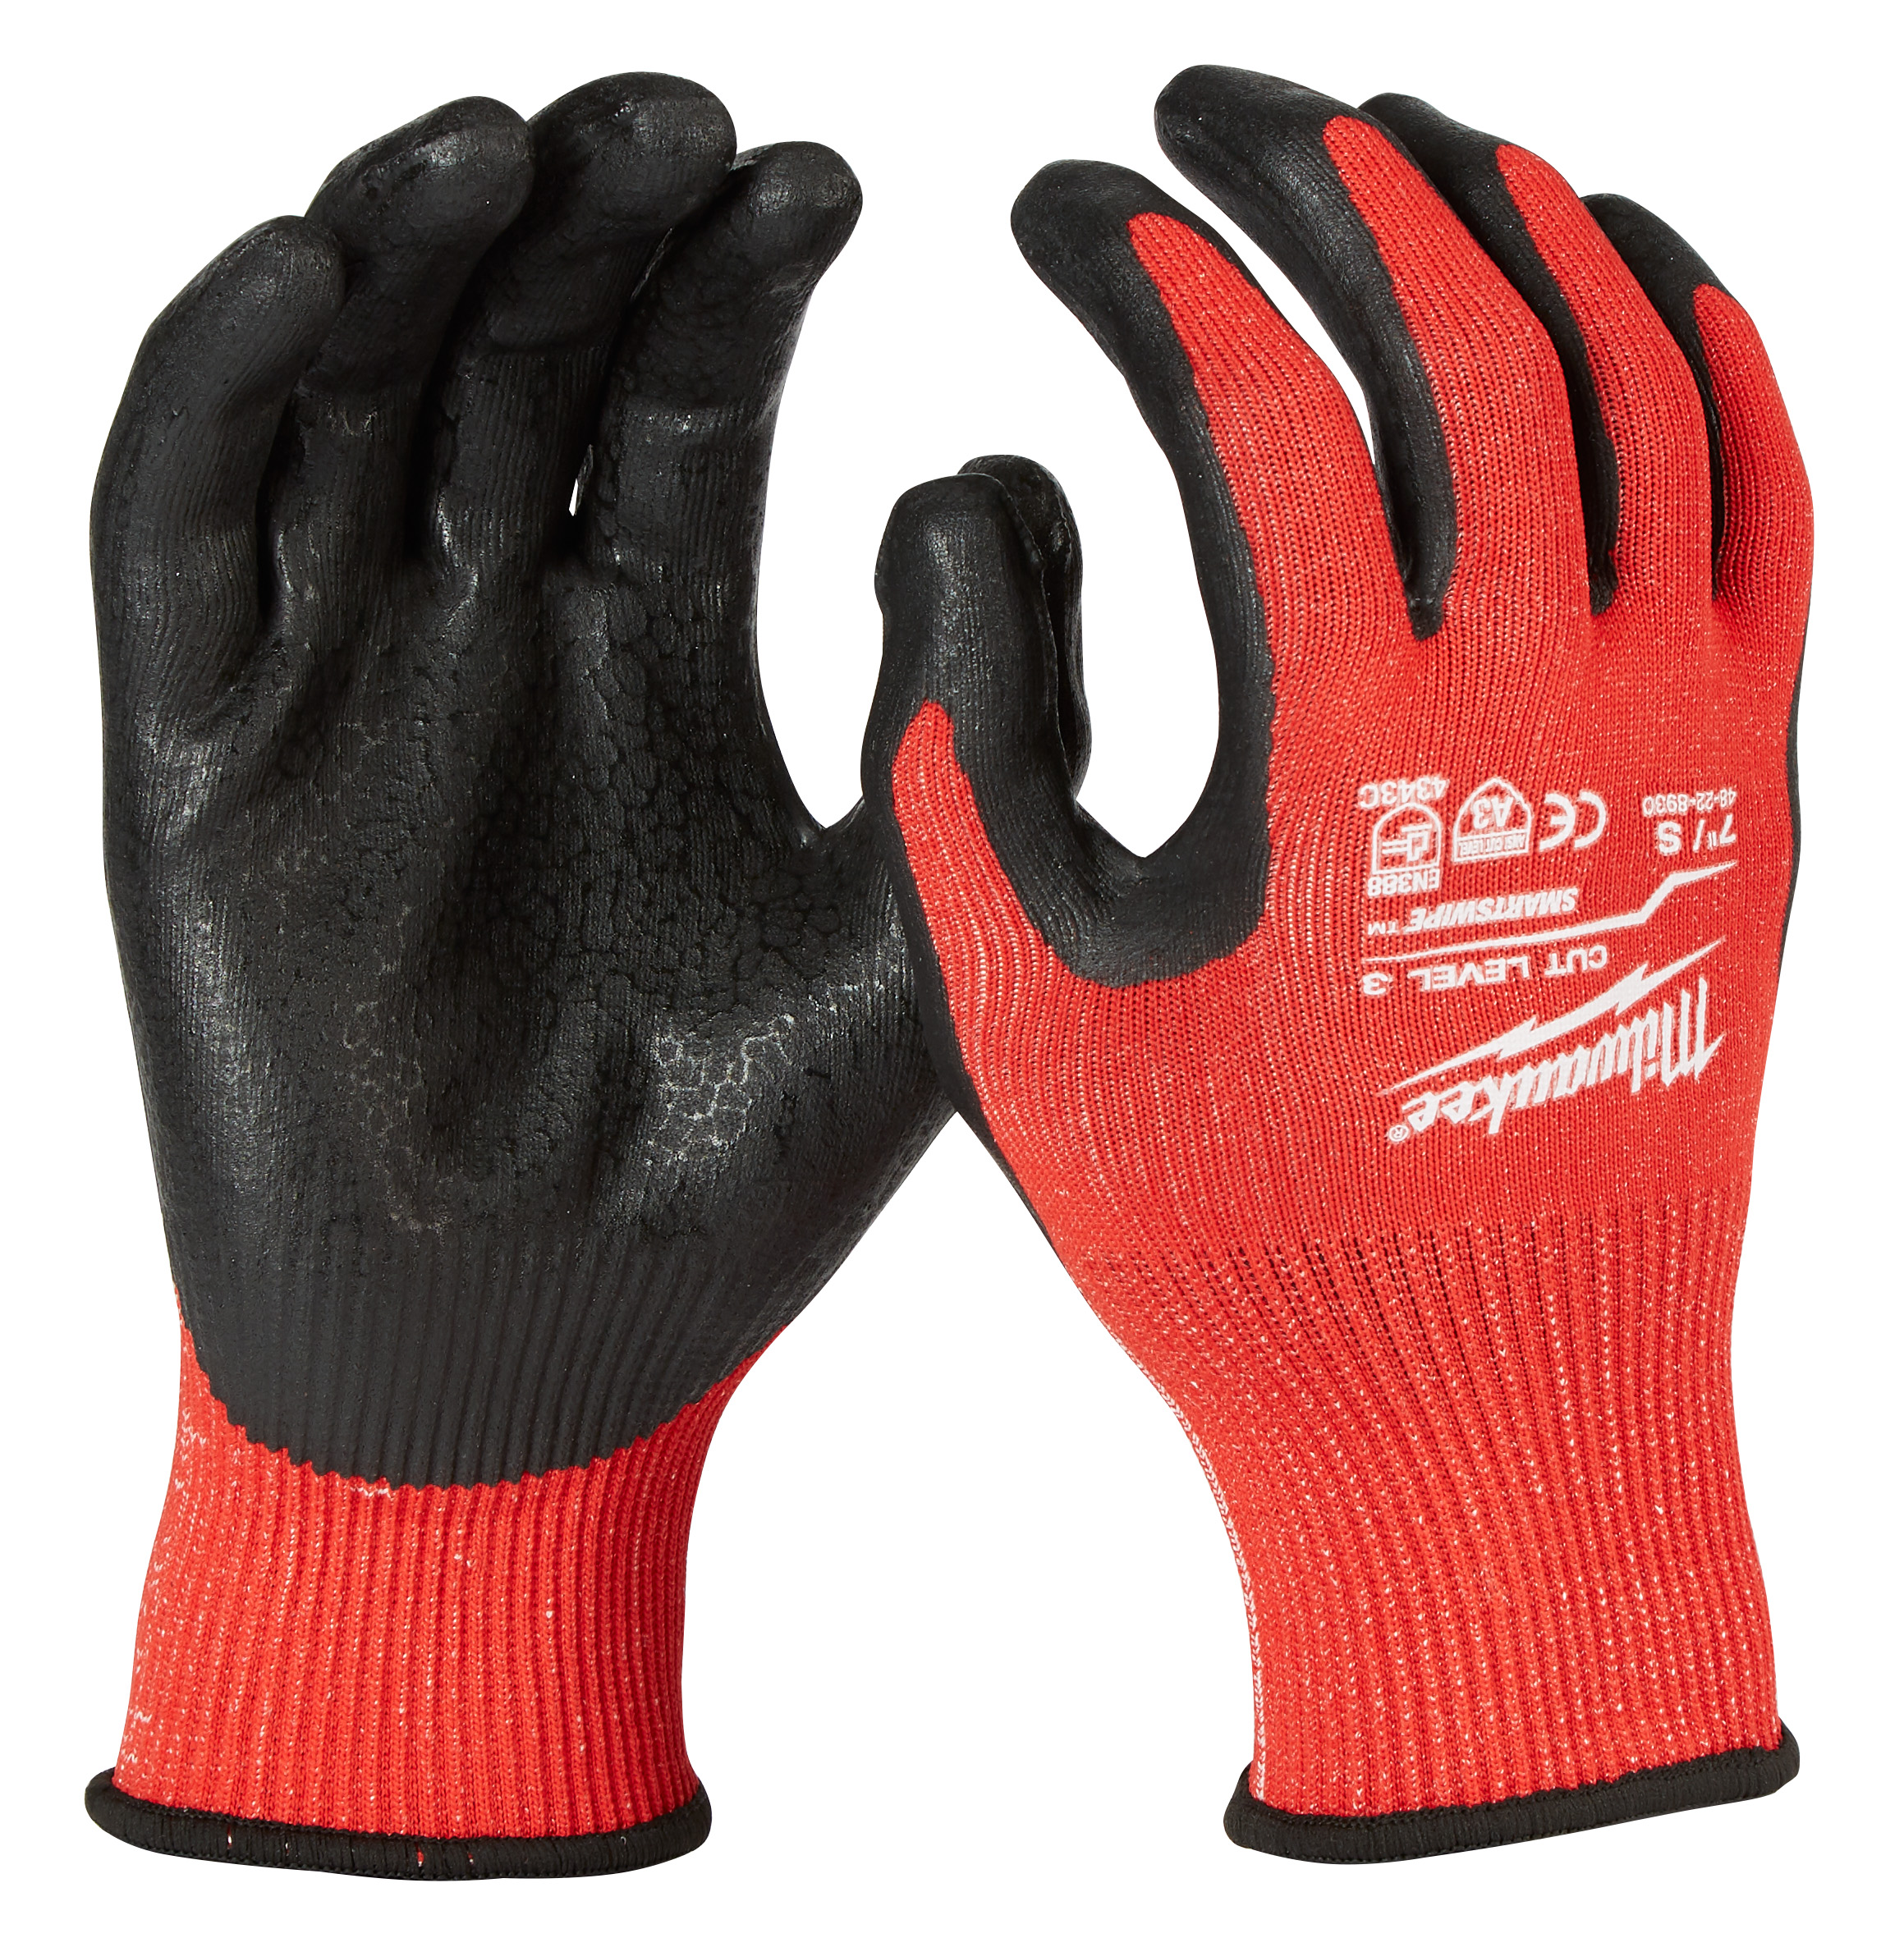 The Milwaukee Tool cut resistant dipped gloves are designed to provide ultimate durability, all–day comfort, and best in class dexterity for handling small objects. These gloves feature ANSI and EN Cut Level III protection as well as best in class puncture resistance to help prevent injuries from sharp objects on the jobsite. Additionally, Milwaukee cut resistant gloves utilize a comfort web grip to provide all-day comfort, best in class grip performance, and ultimate durability. Smartswipe™ fingertips and palms provide full access to touchscreen devices without removing the gloves and also feature high dexterity fingertips to maximize control when handling small objects.